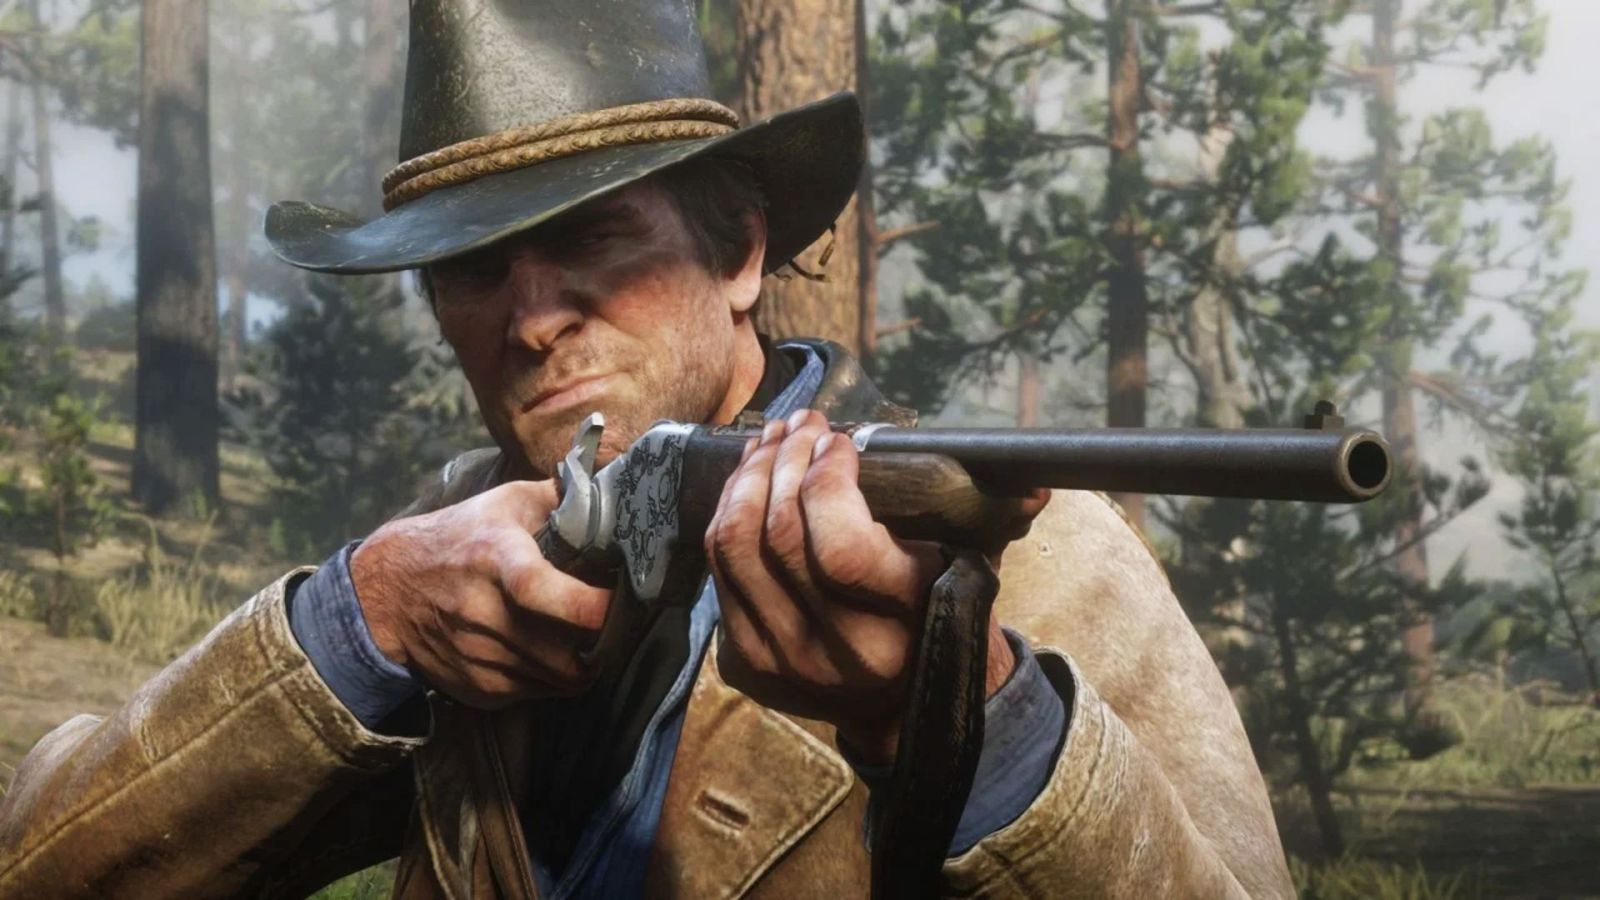 ps5 hackers make their own red dead redemption 2 remaster